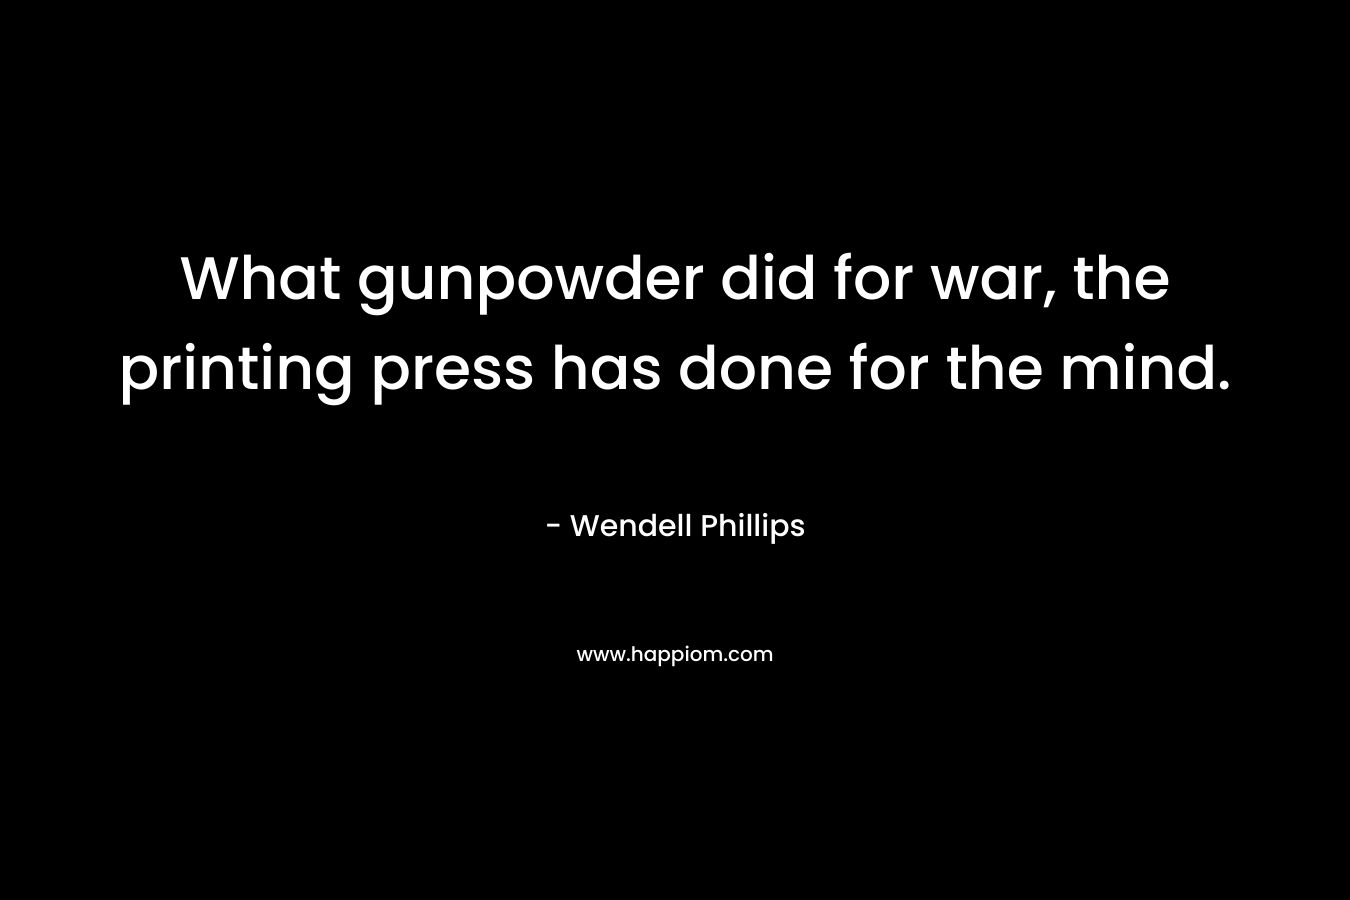 What gunpowder did for war, the printing press has done for the mind. – Wendell Phillips